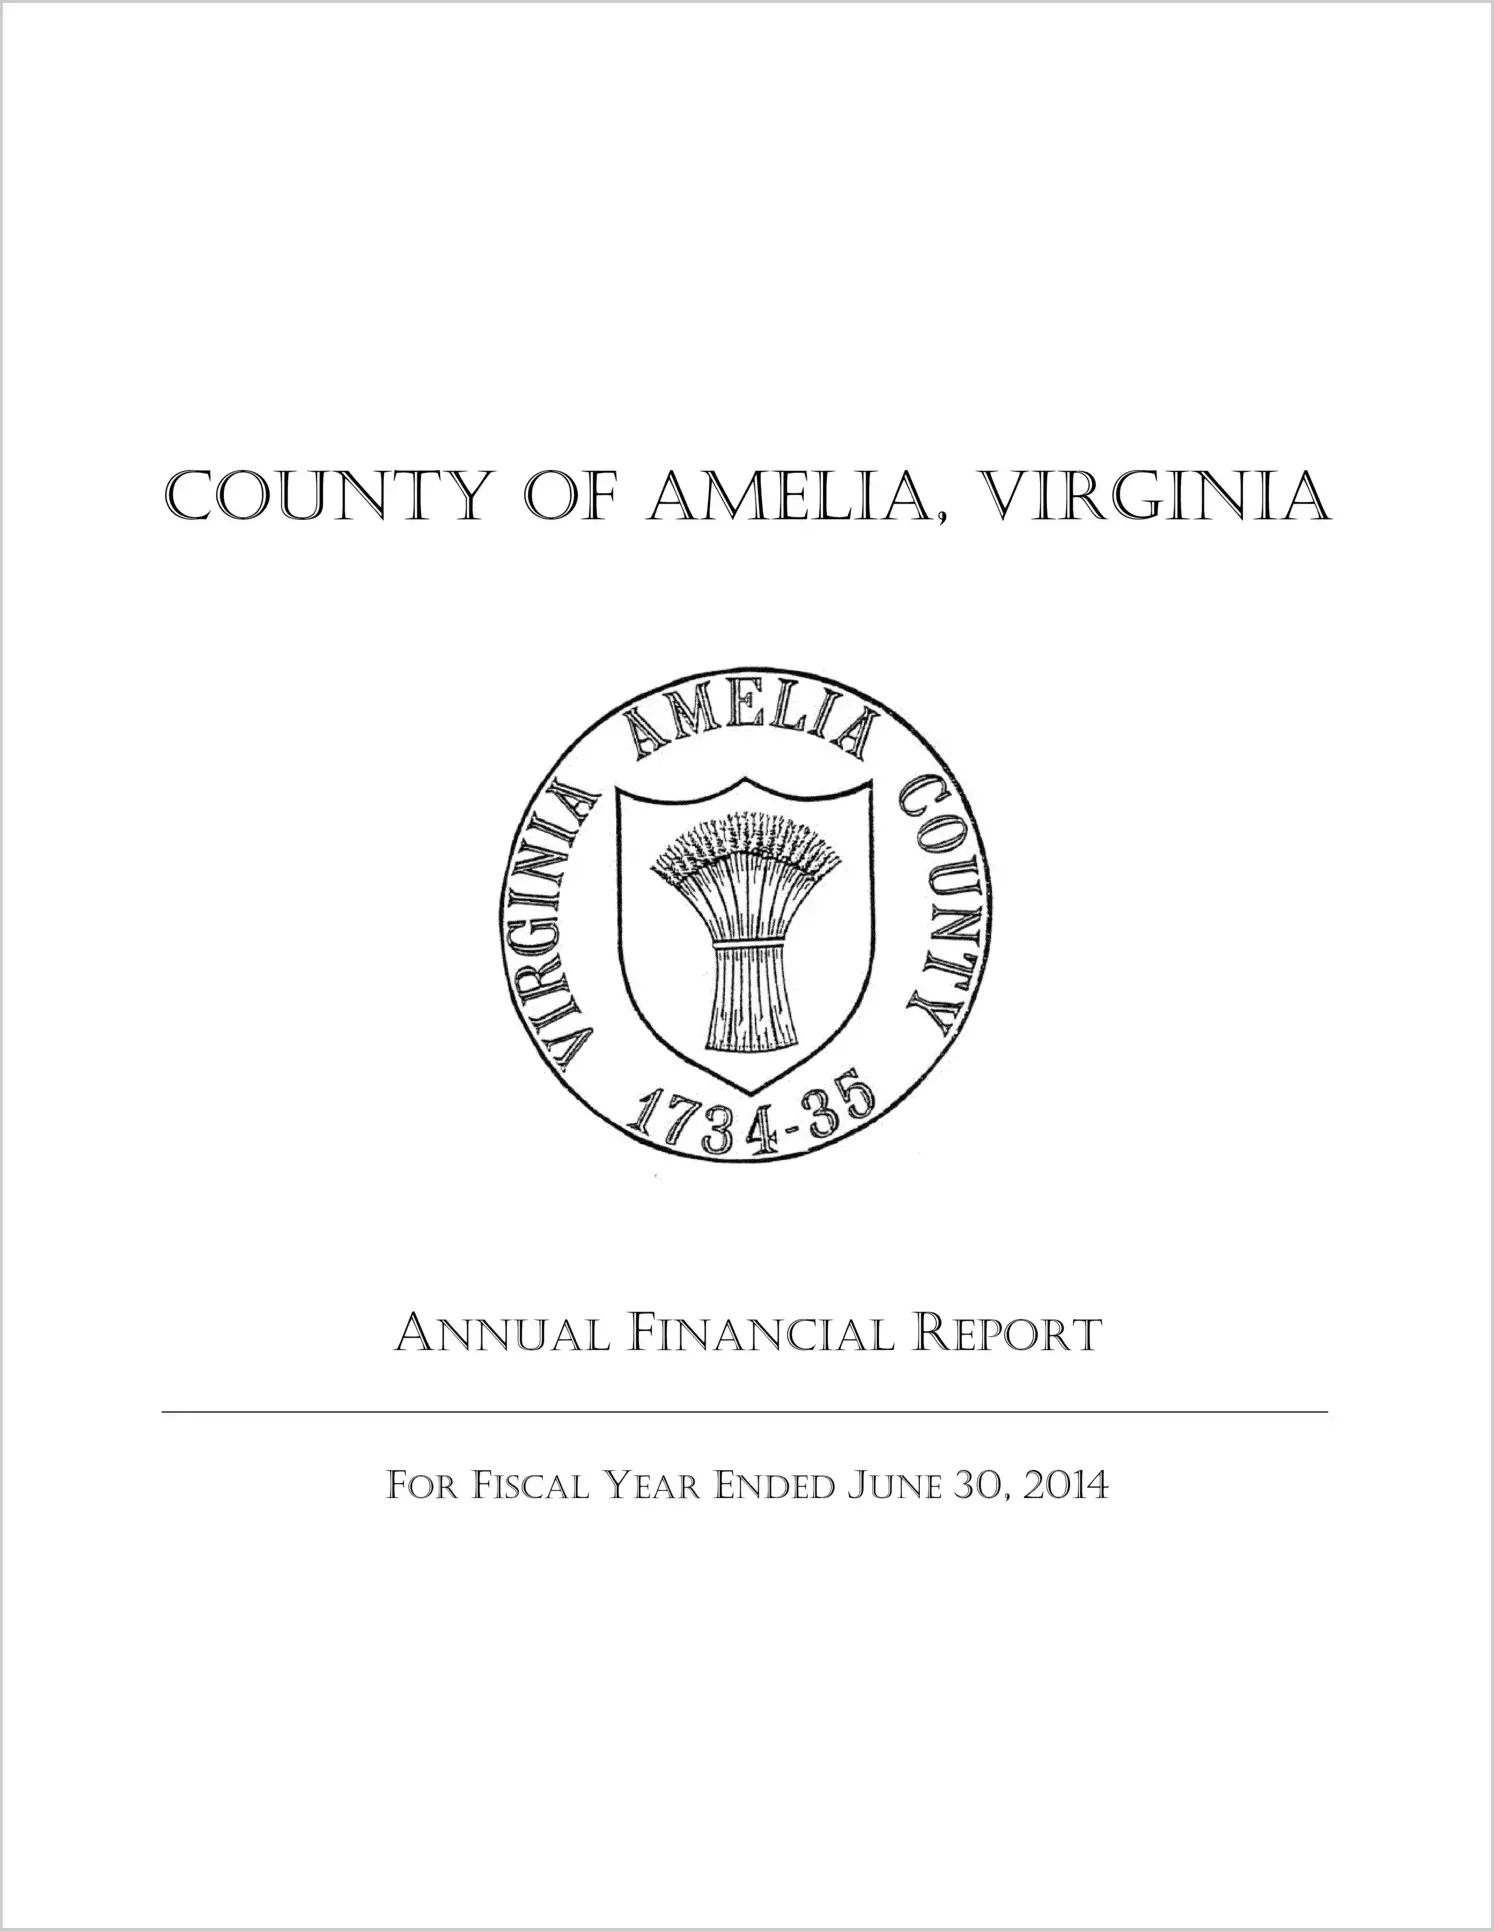 2014 Annual Financial Report for County of Amelia